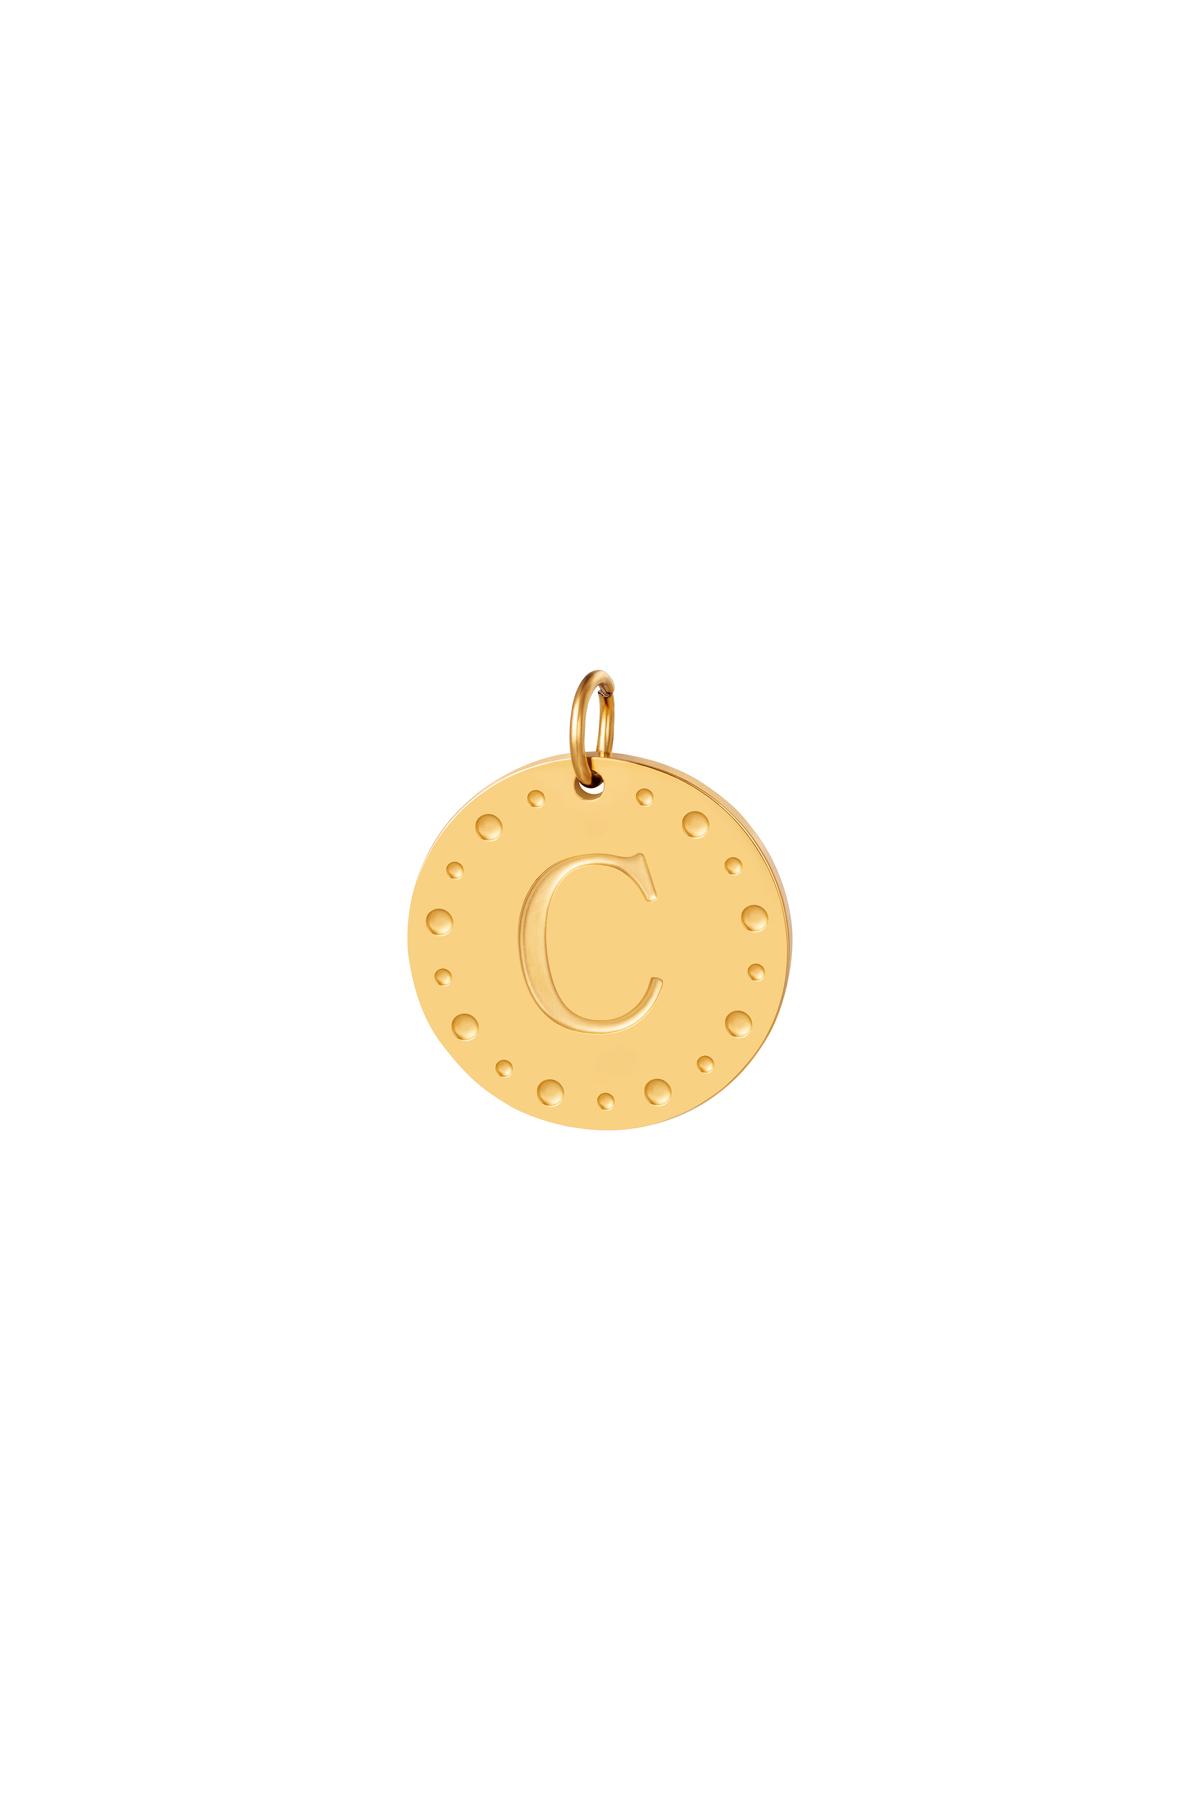 Gold / Circle charm initial C Gold Stainless Steel 